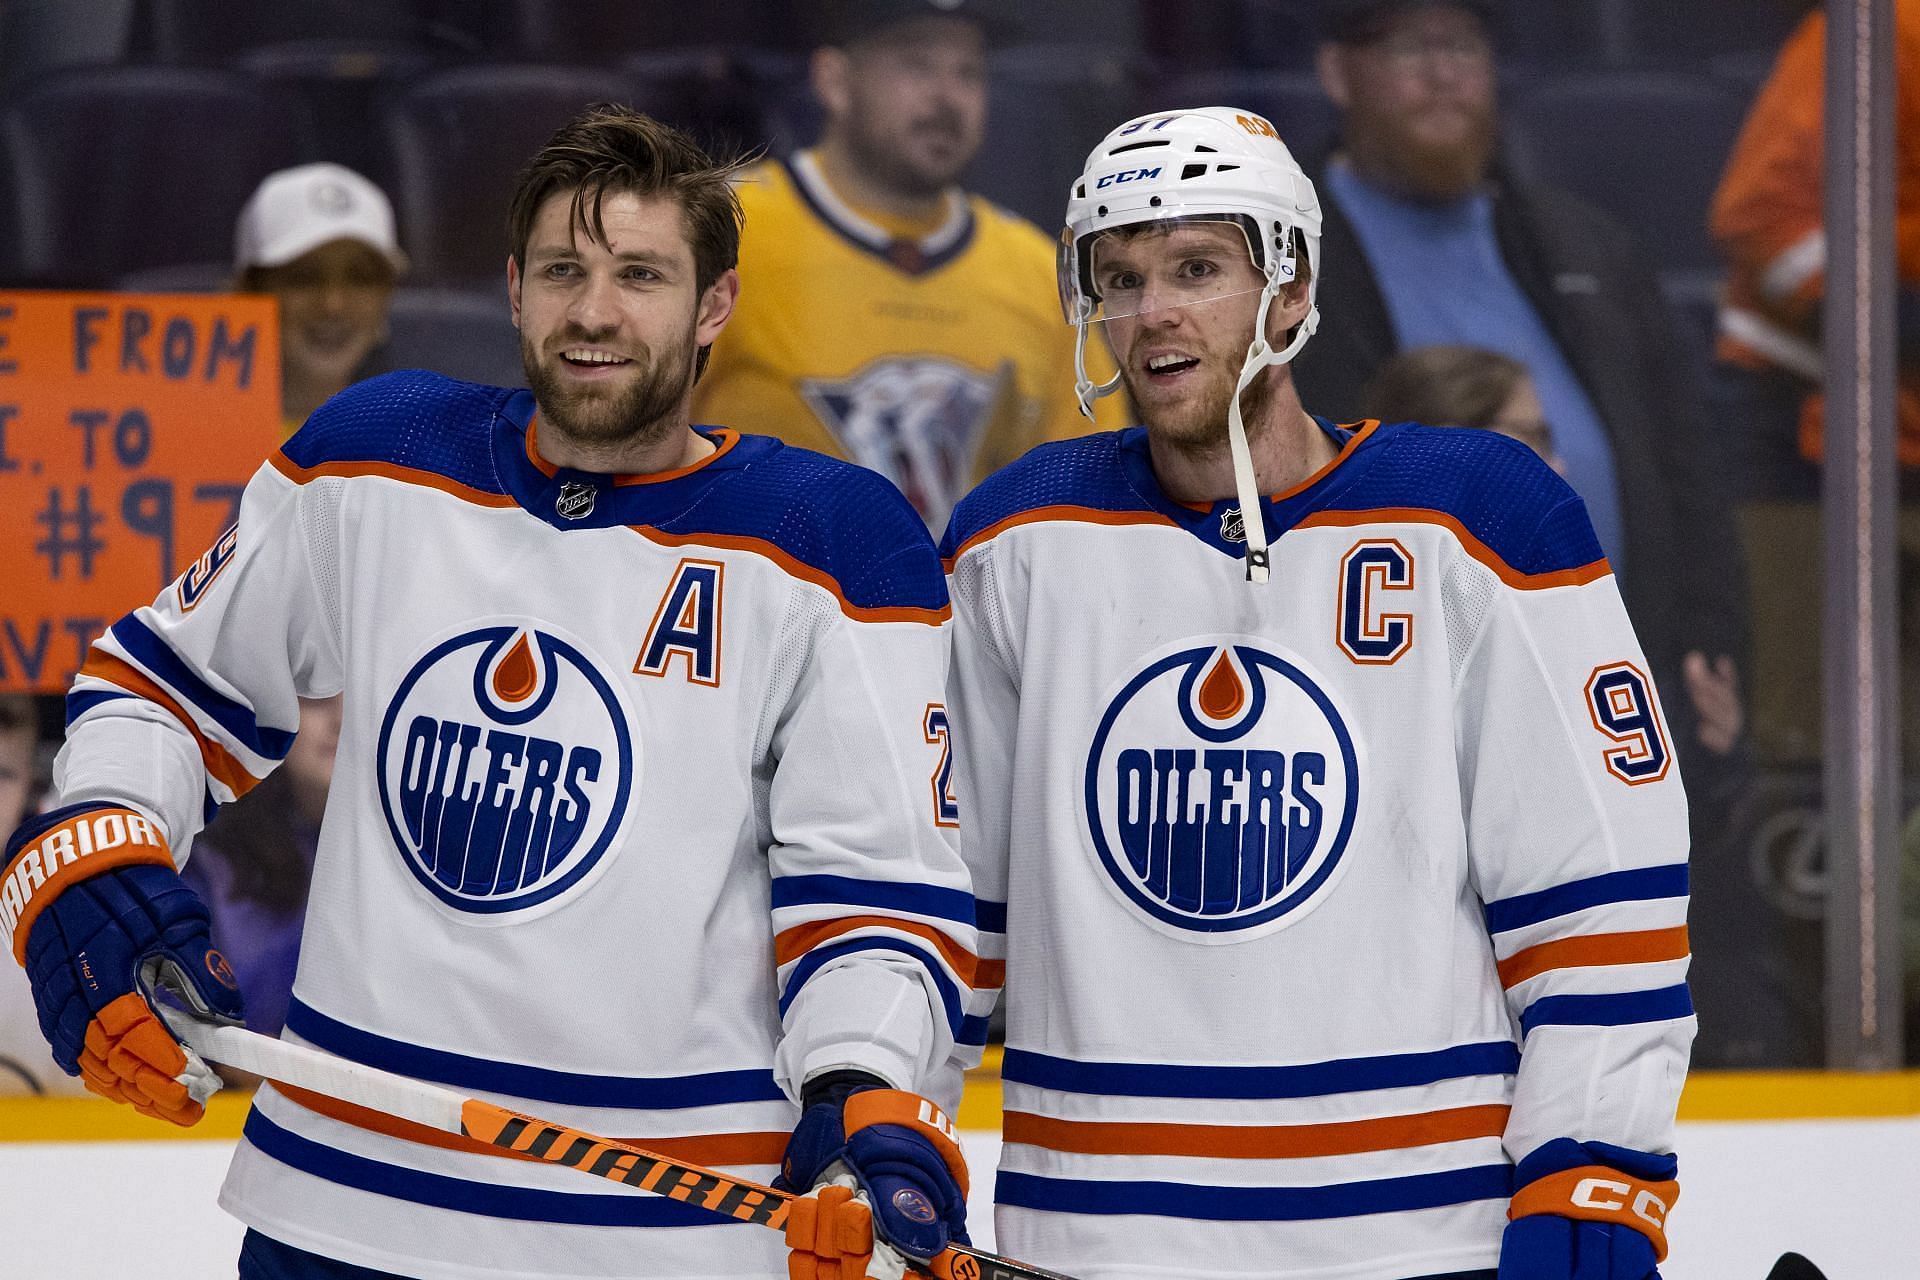 eon Draisaitl gives his honest opinion on playing second fiddle to Connor McDavid